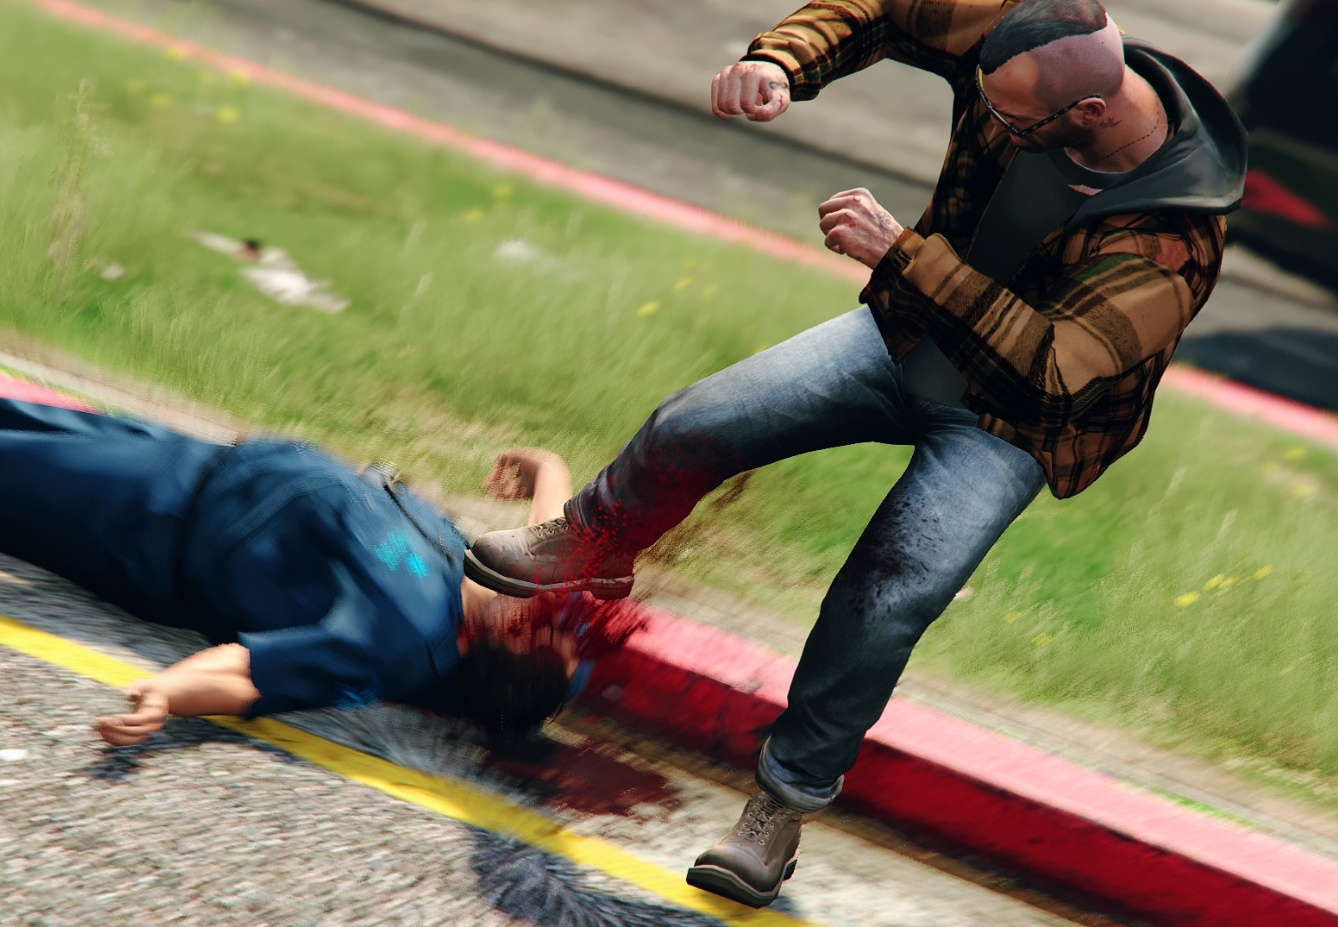 Gore and blood gta 5 фото 72